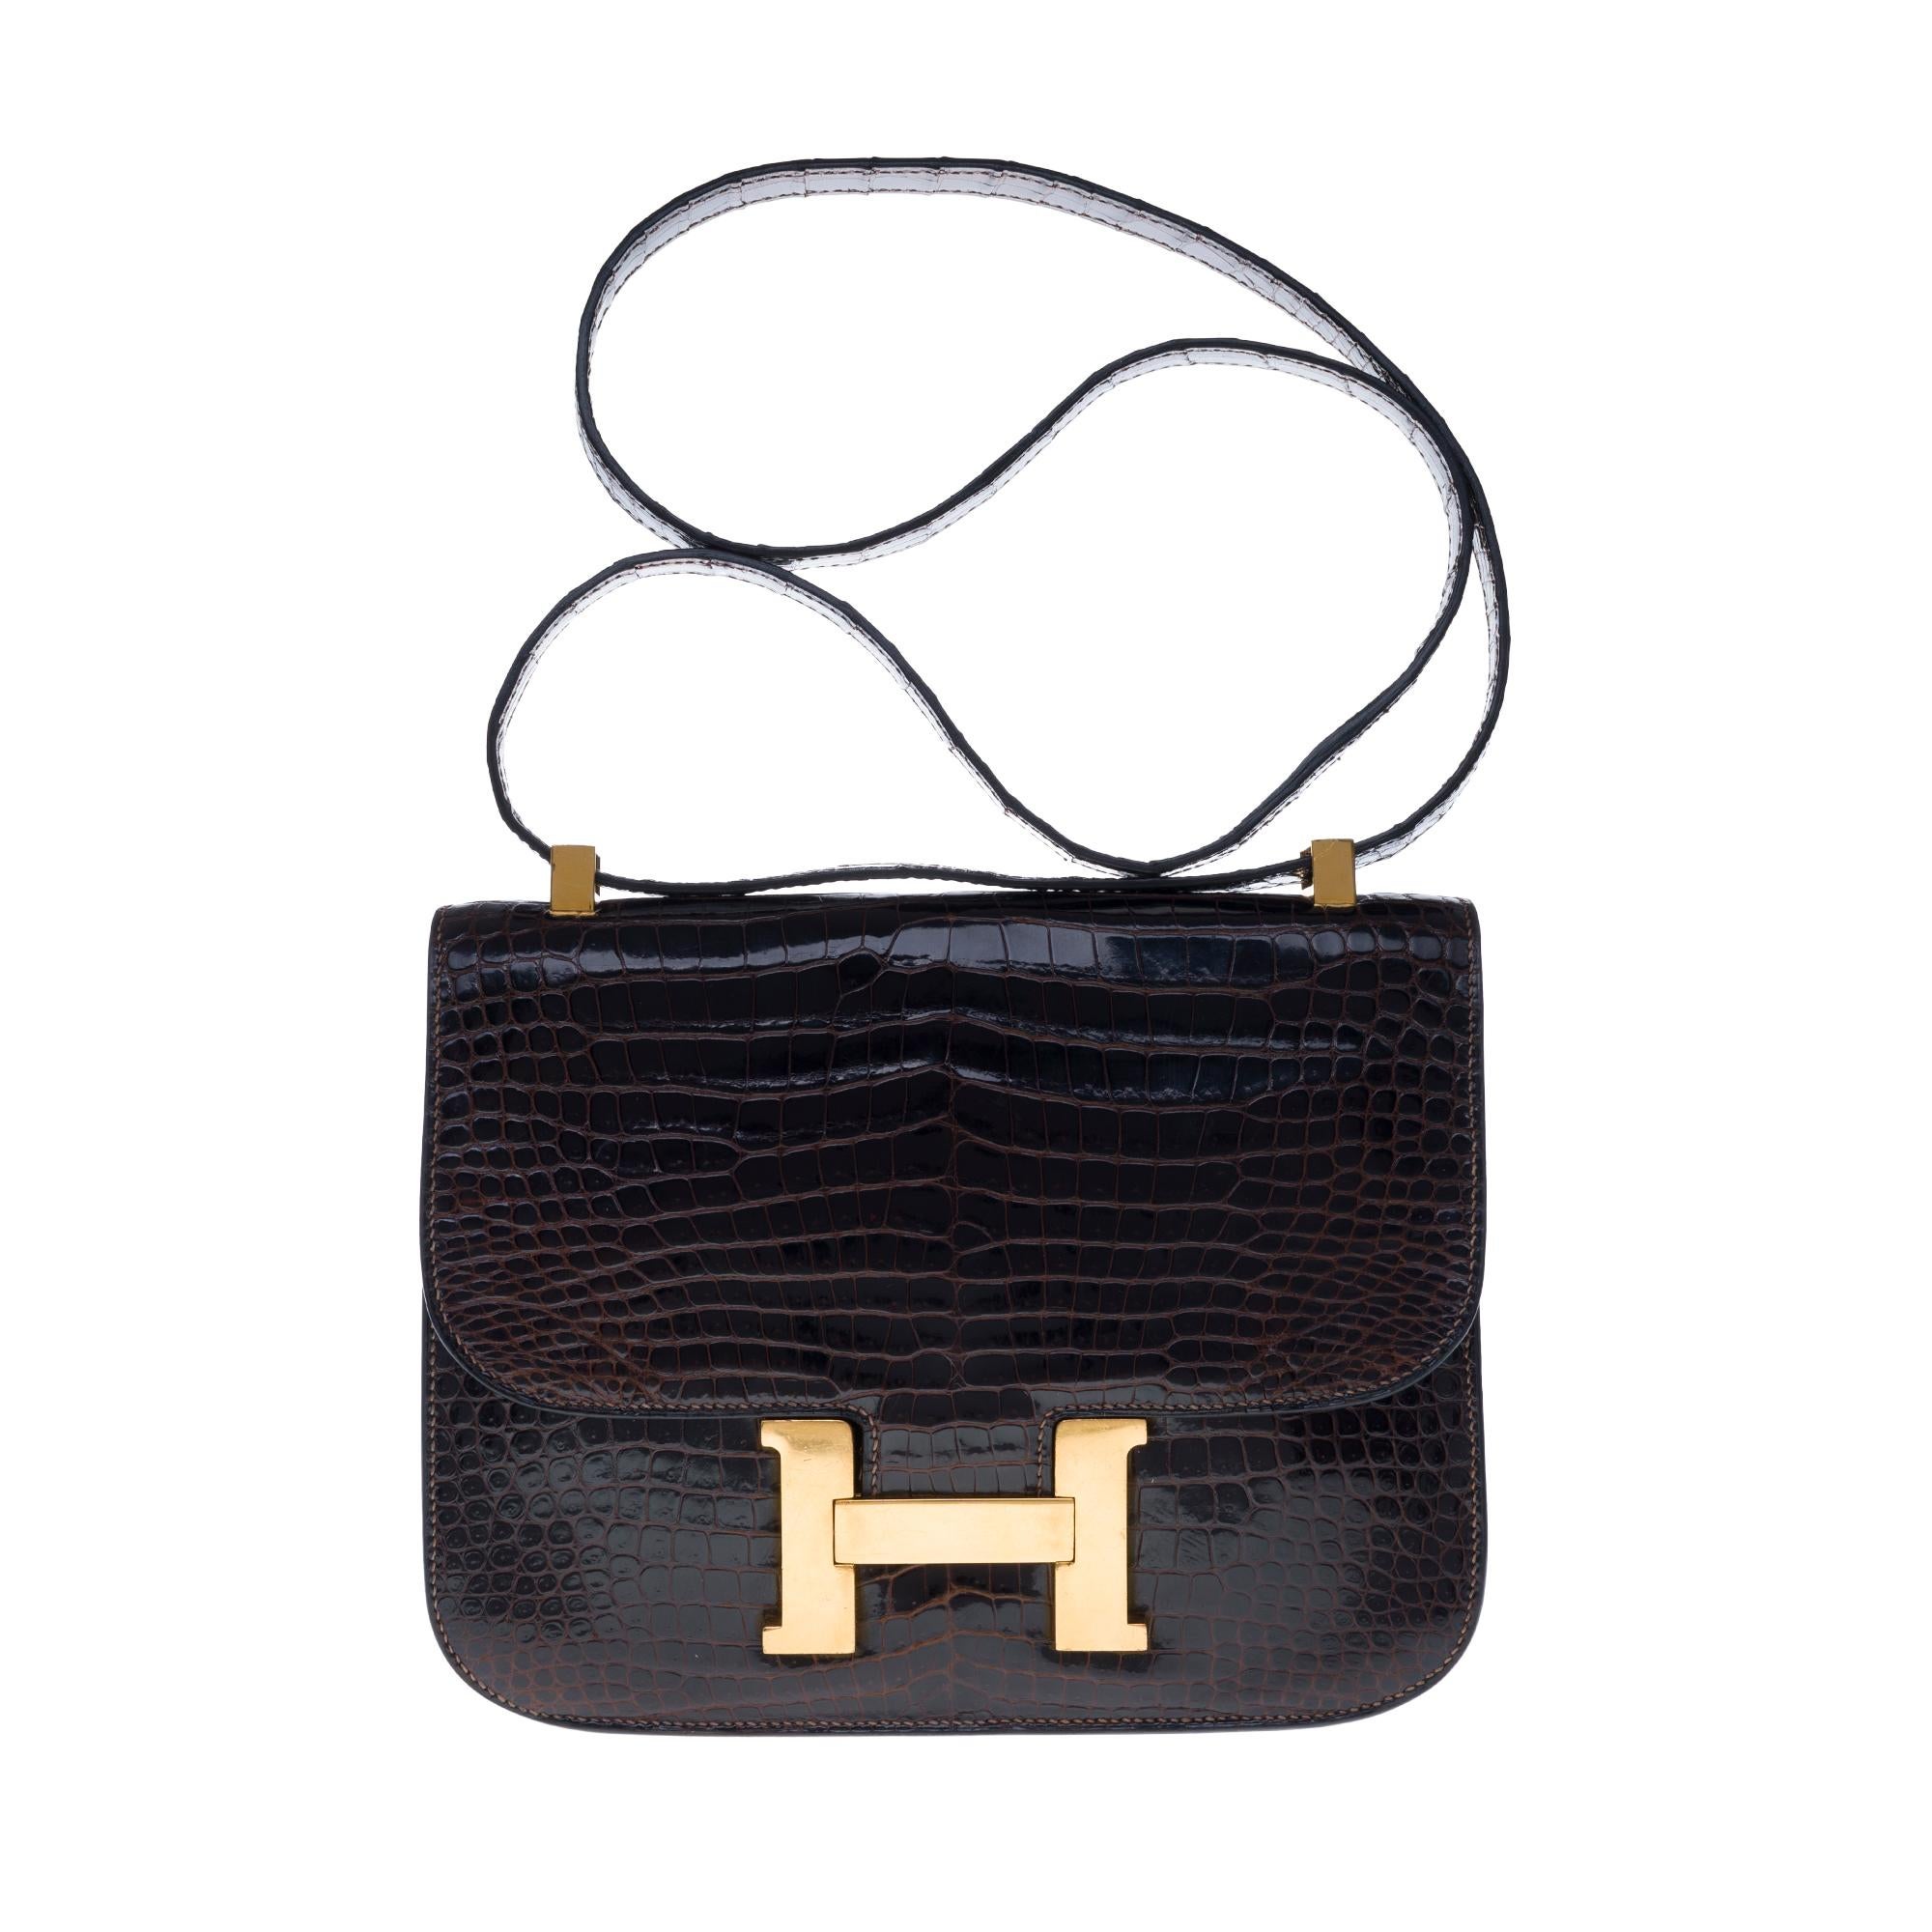 Amazing Hermes Constance handbag in brown Crocodile Porosus, gold-tone metal hardware, brown crocodile handle for hand or shoulder support.

Logo closure on flap.
A patch pocket on the back of the bag.
Lining in brown leather, a zipped pocket, a